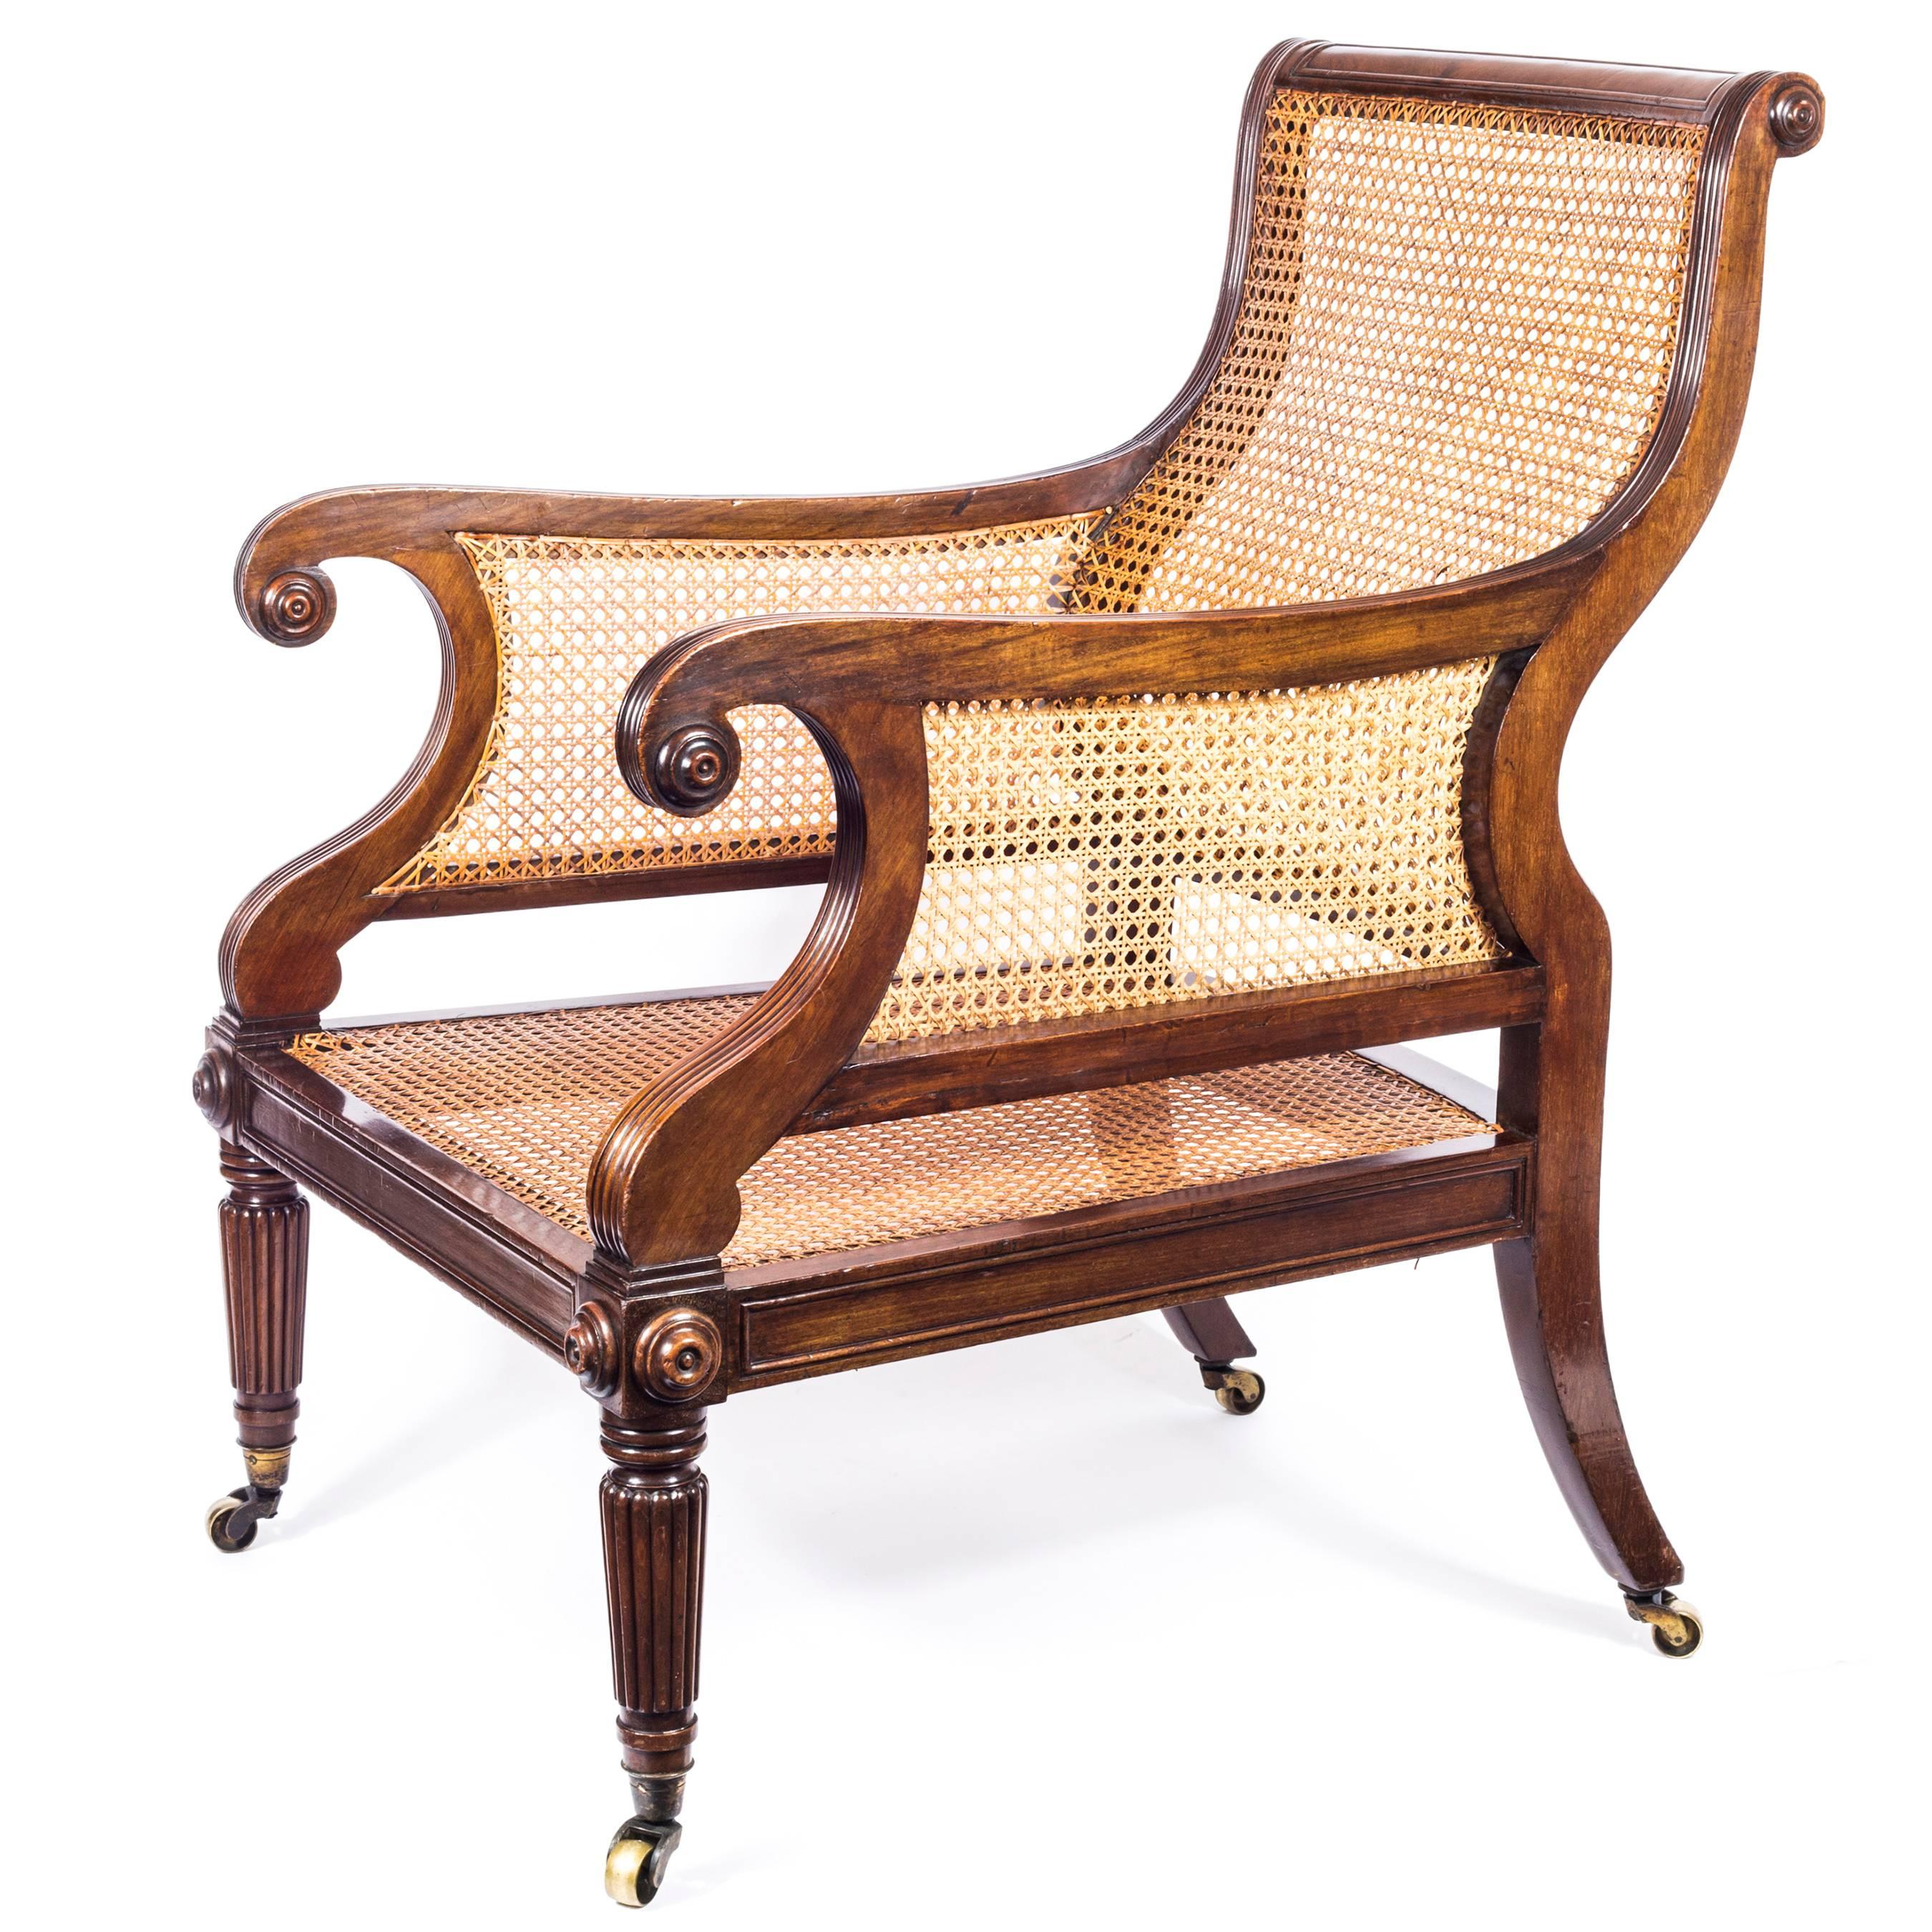 English Regency Mahogany Library Bergère Armchair Attributed to Gillows 1